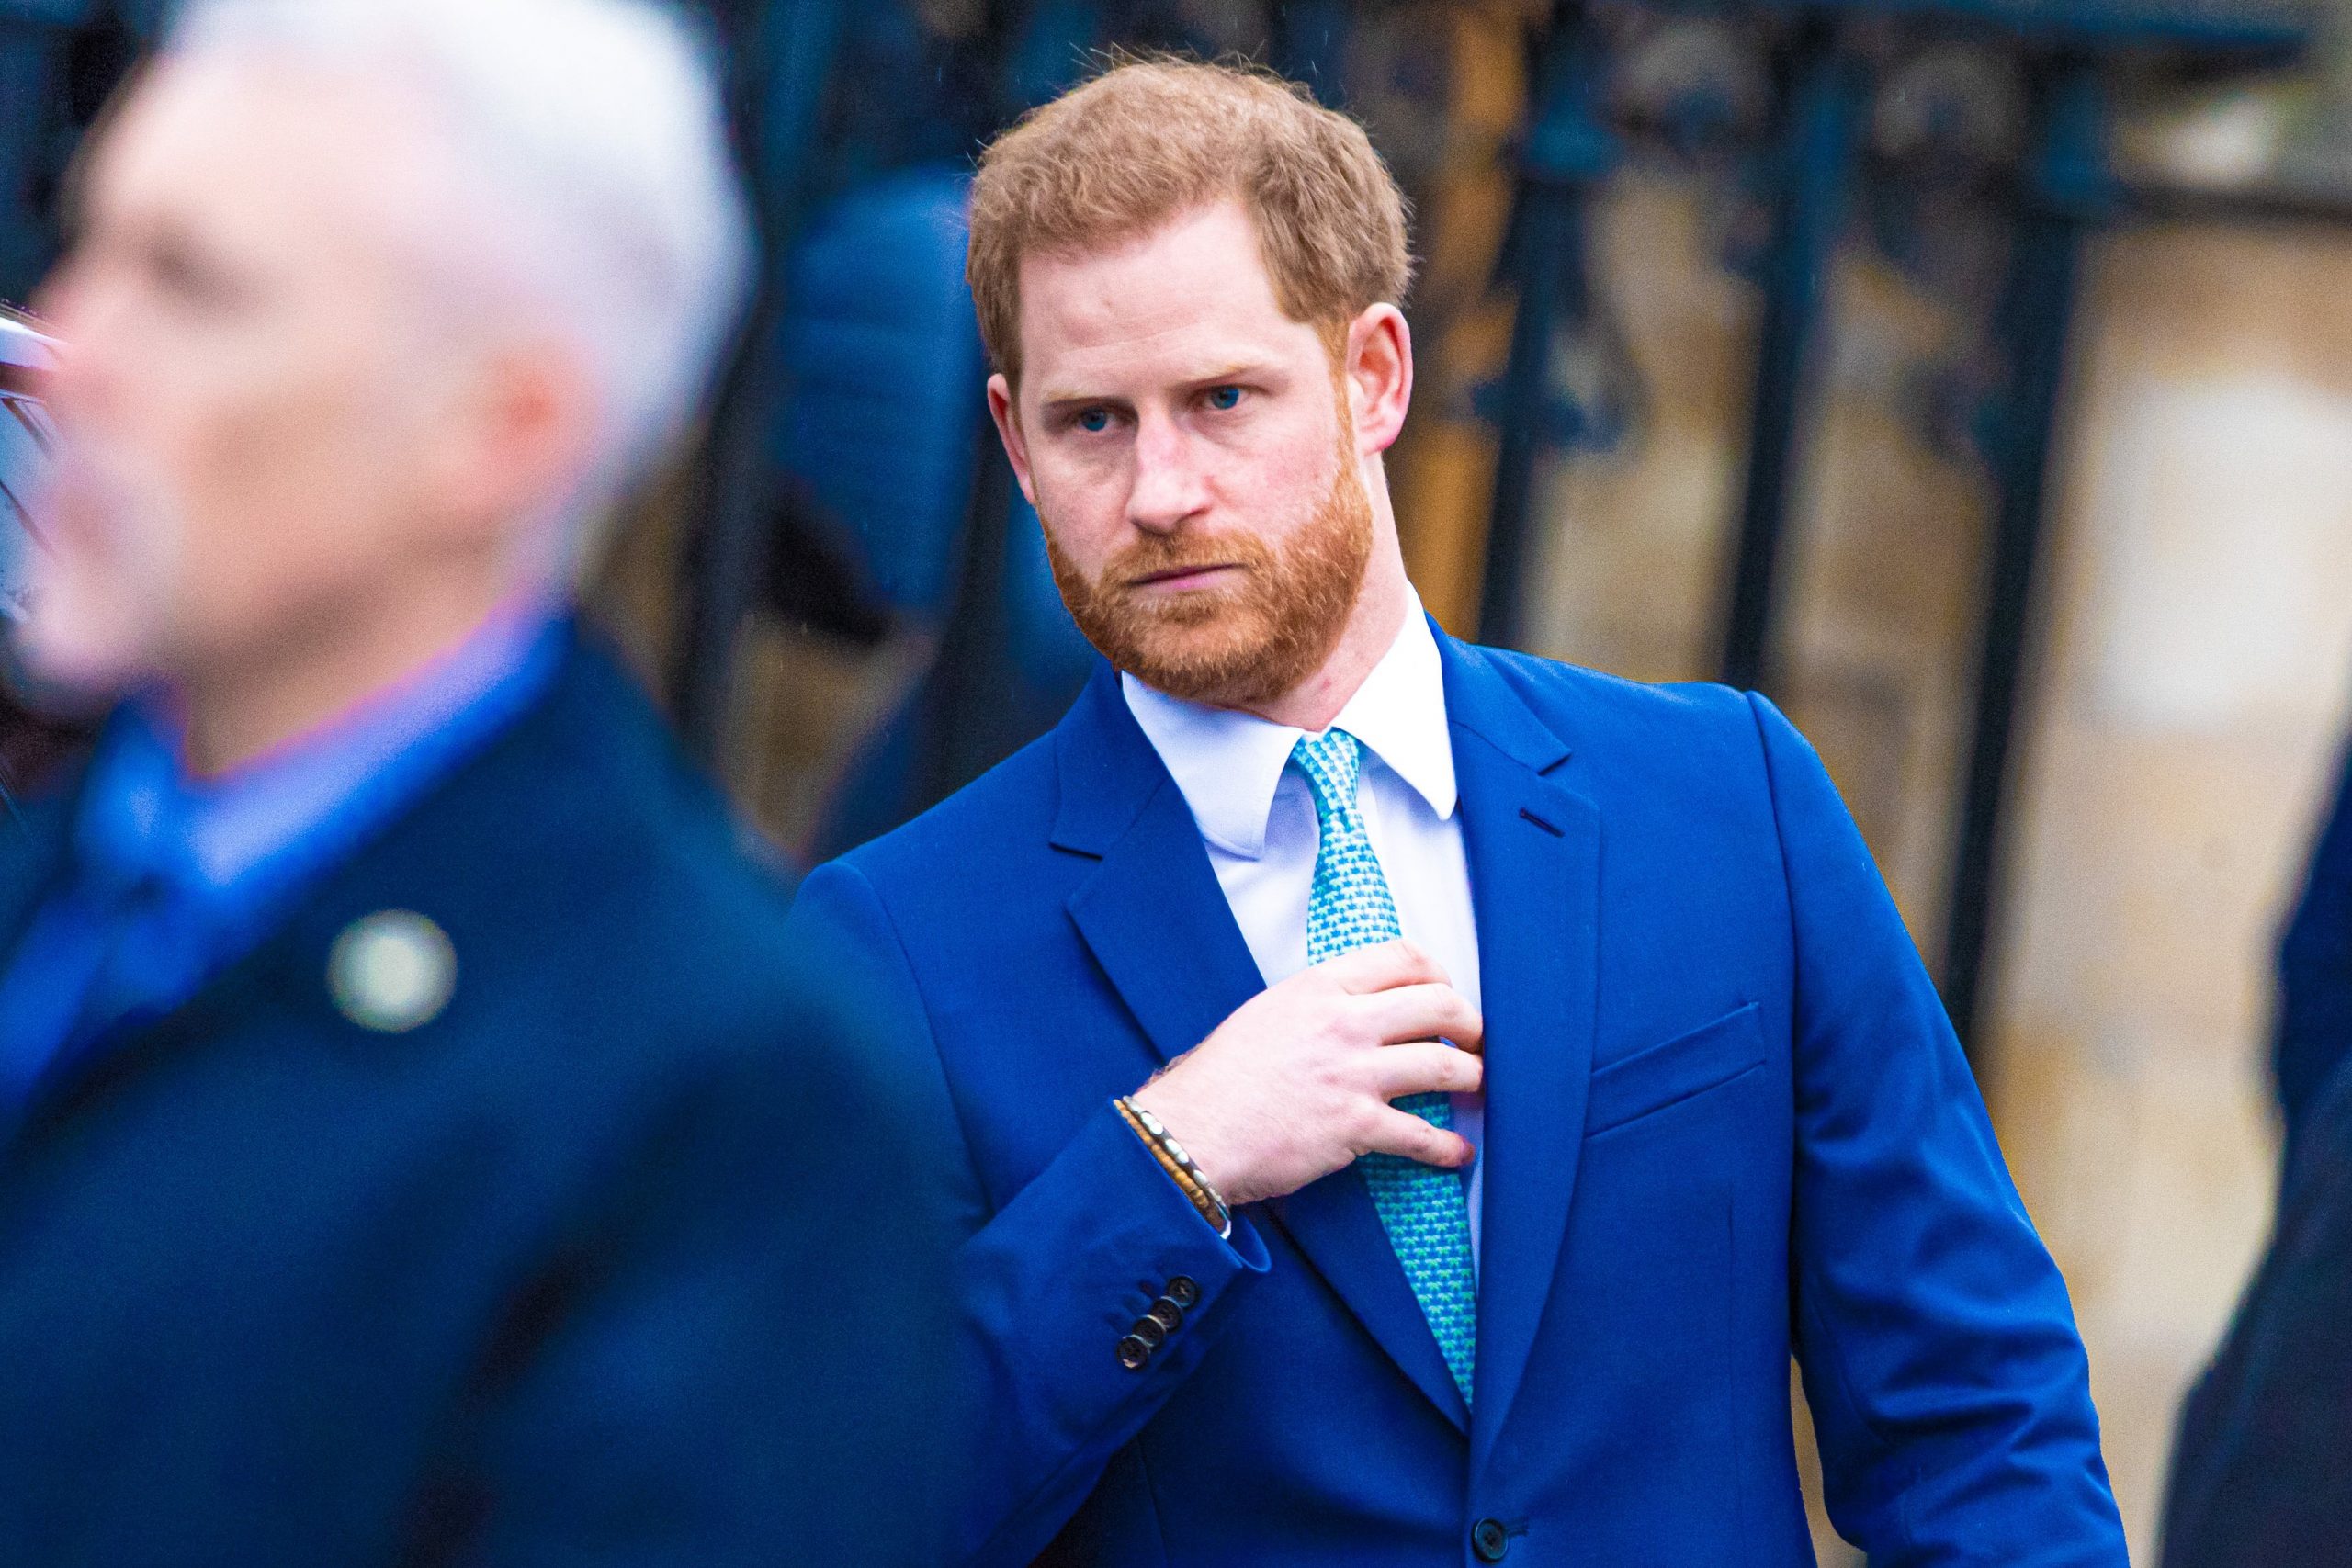 Prince Harry will be the CEO of a Silicon Valley startup